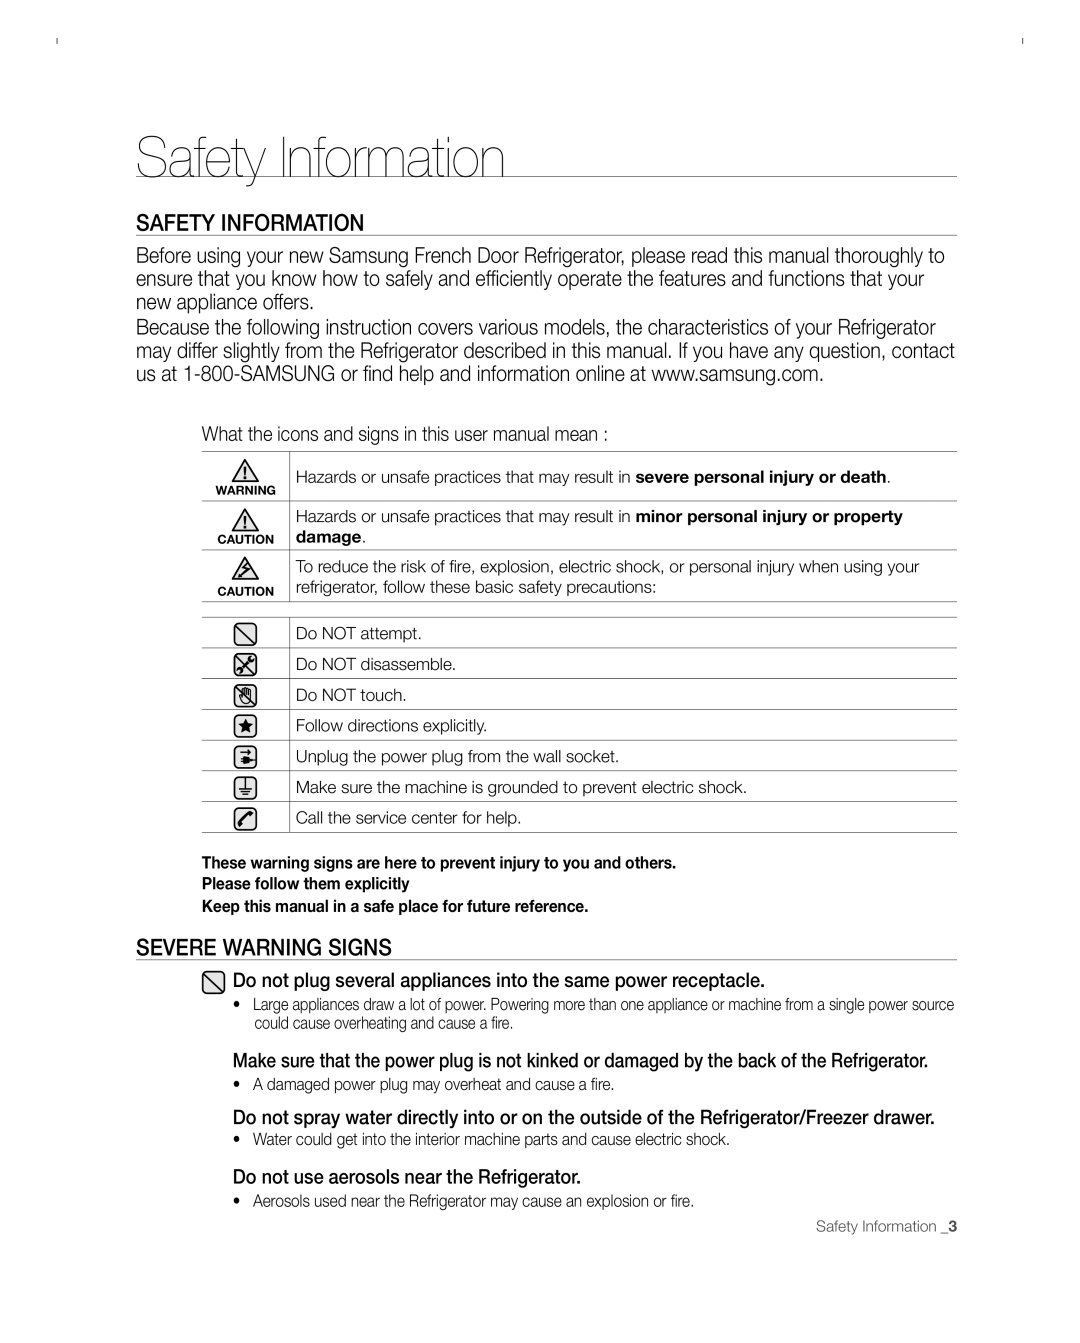 Samsung RFG297AC Safety Information, Severe Warning Signs, Do not plug several appliances into the same power receptacle 